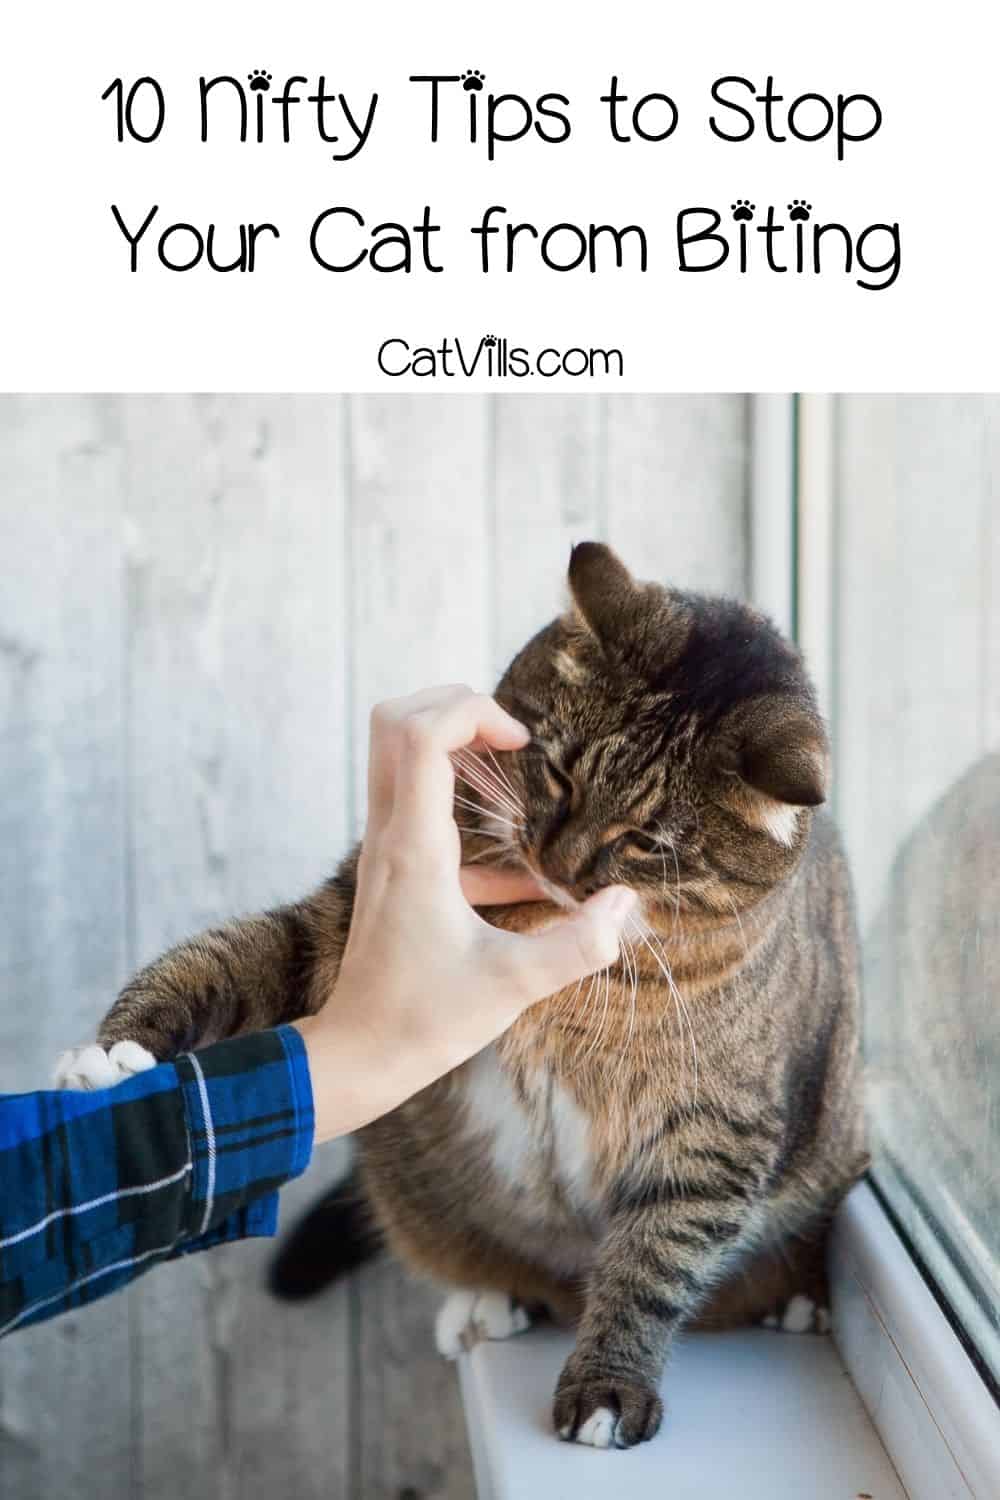 How to Stop Your Cat From Biting You [10 Useful Tips]